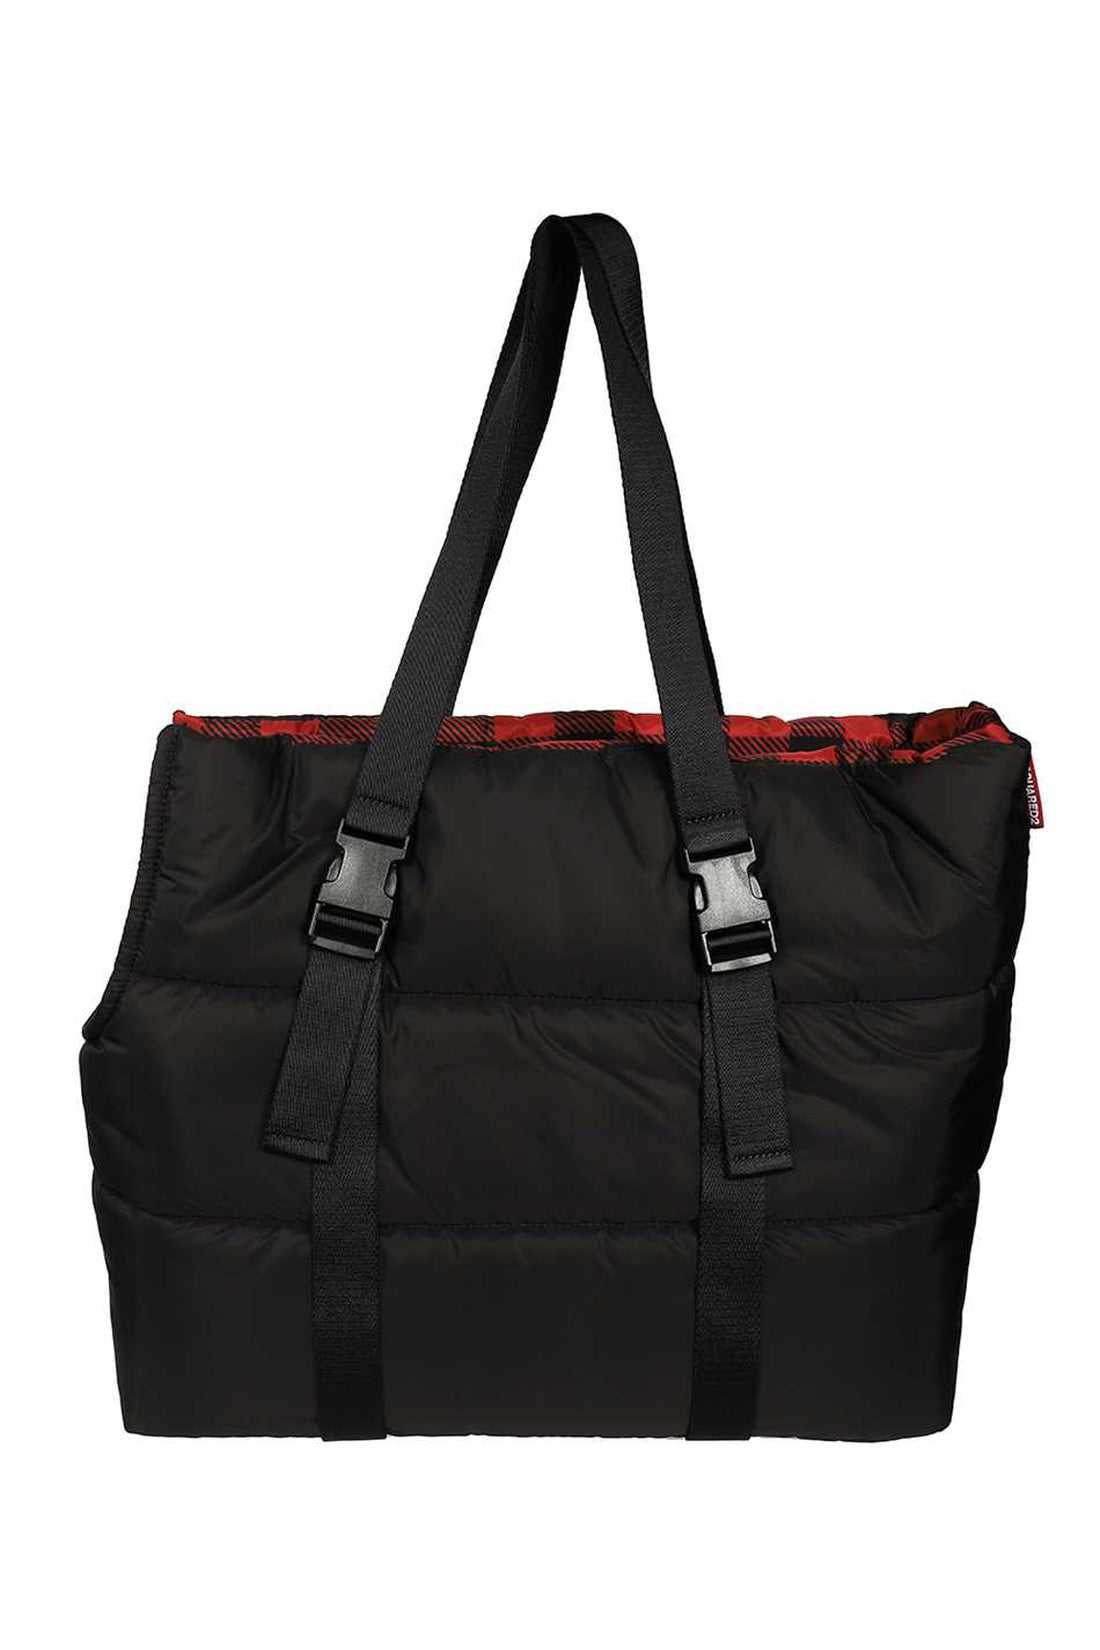 Dsquared2-OUTLET-SALE-Poldo x D2 - Toronto padded carrier for dogs-ARCHIVIST